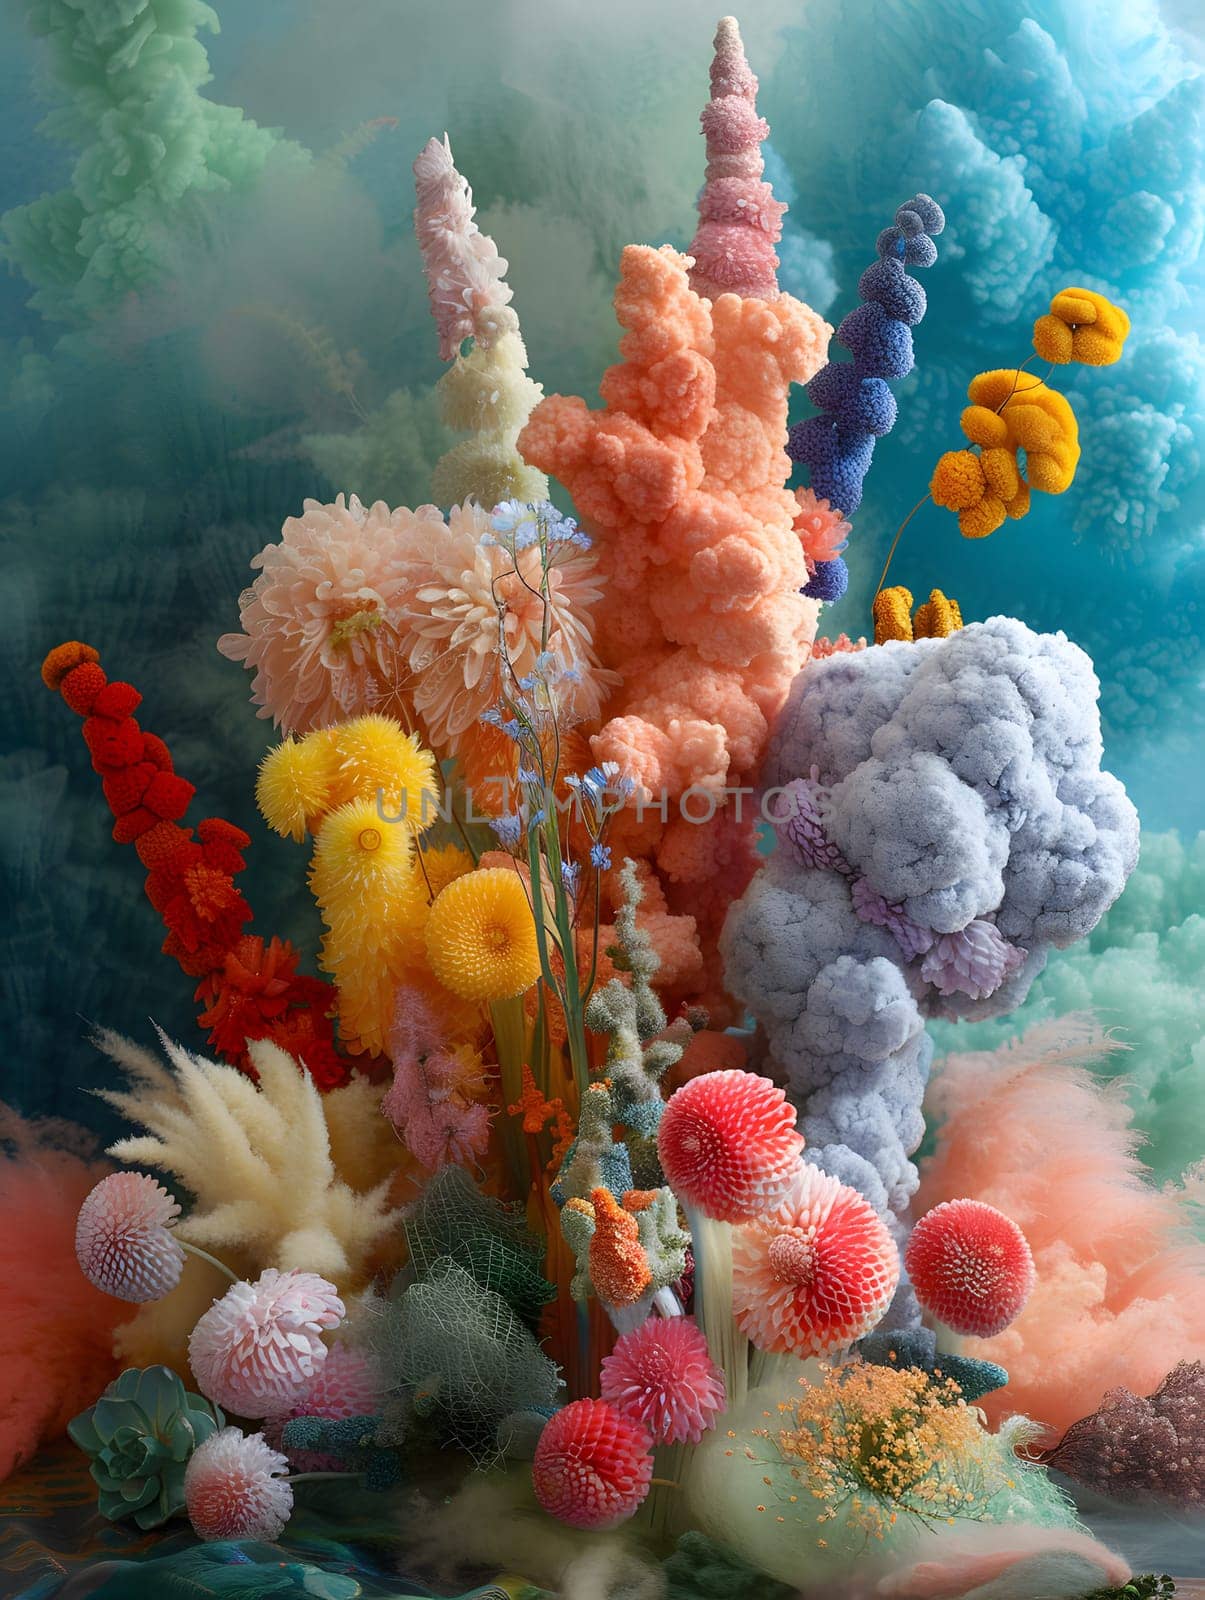 A beautiful array of colorful flowers is gracefully floating in the natural environment, resembling an underwater coral reef. Each petal is like a work of art in this stunning display of nature